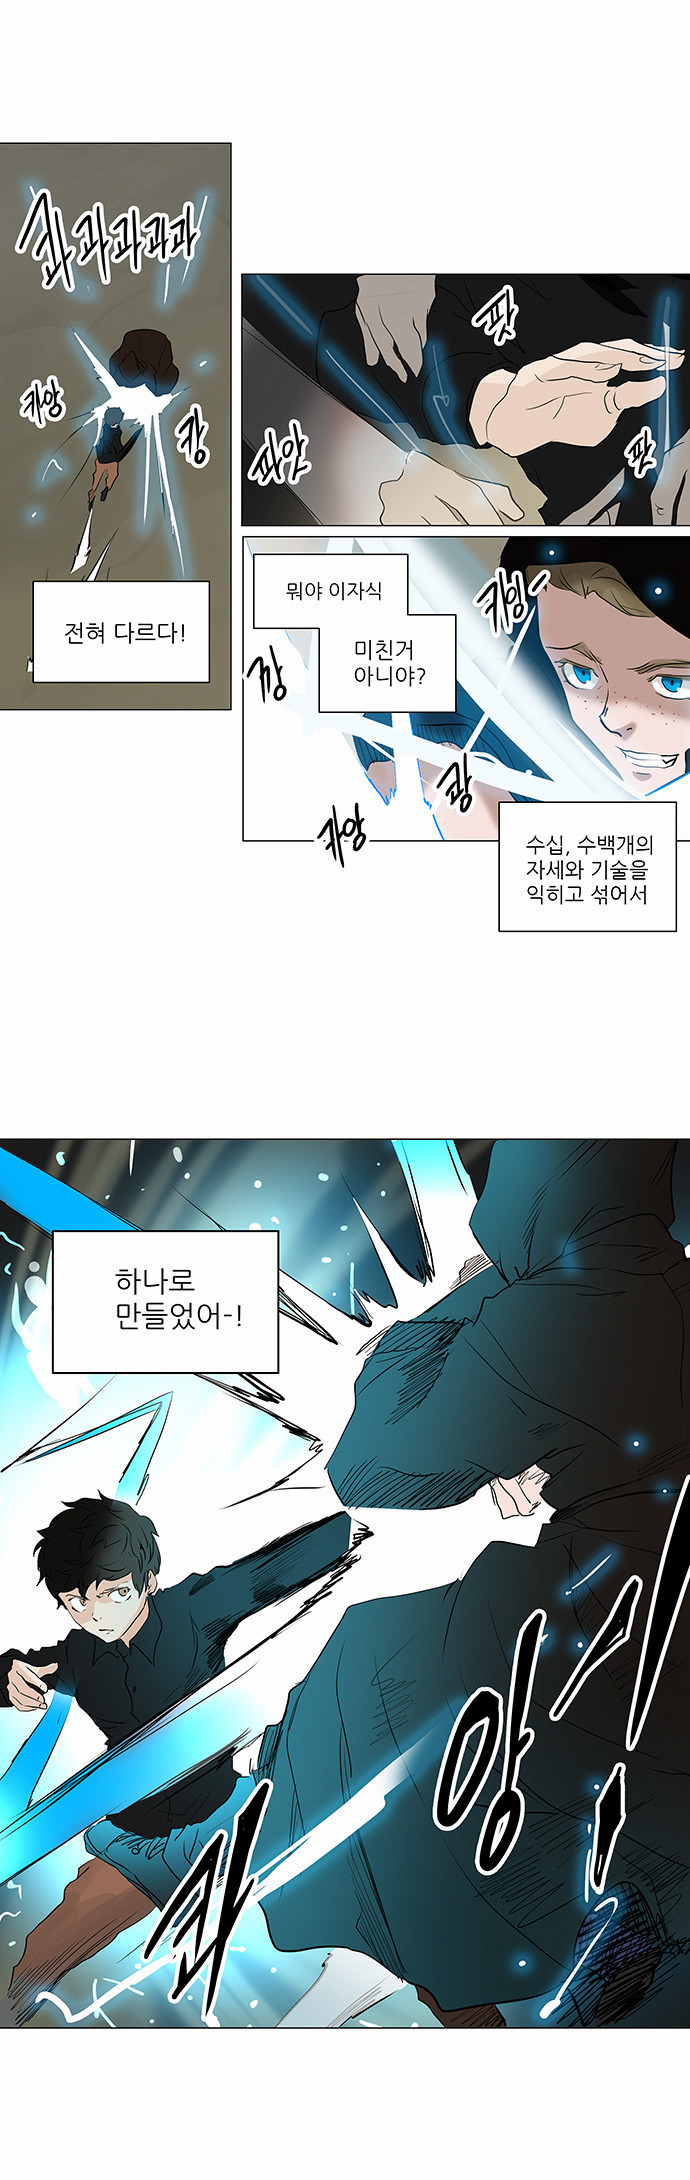 Tower of God - Chapter 219 - Page 1